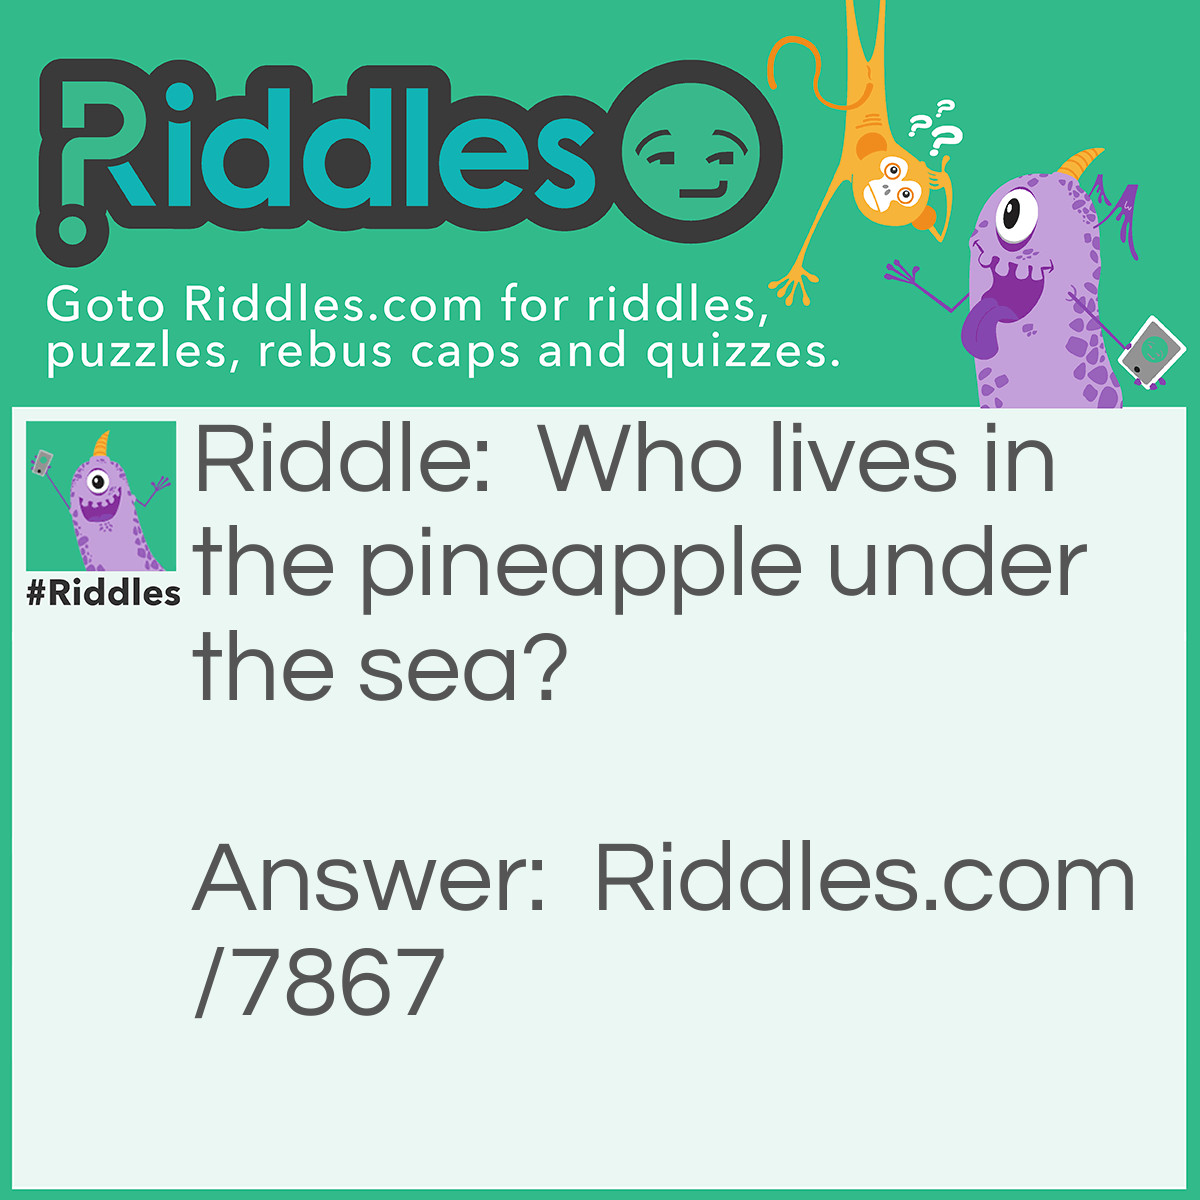 Riddle: Who lives in the pineapple under the sea? Answer: Nobody because pineapples won't survive underwater.